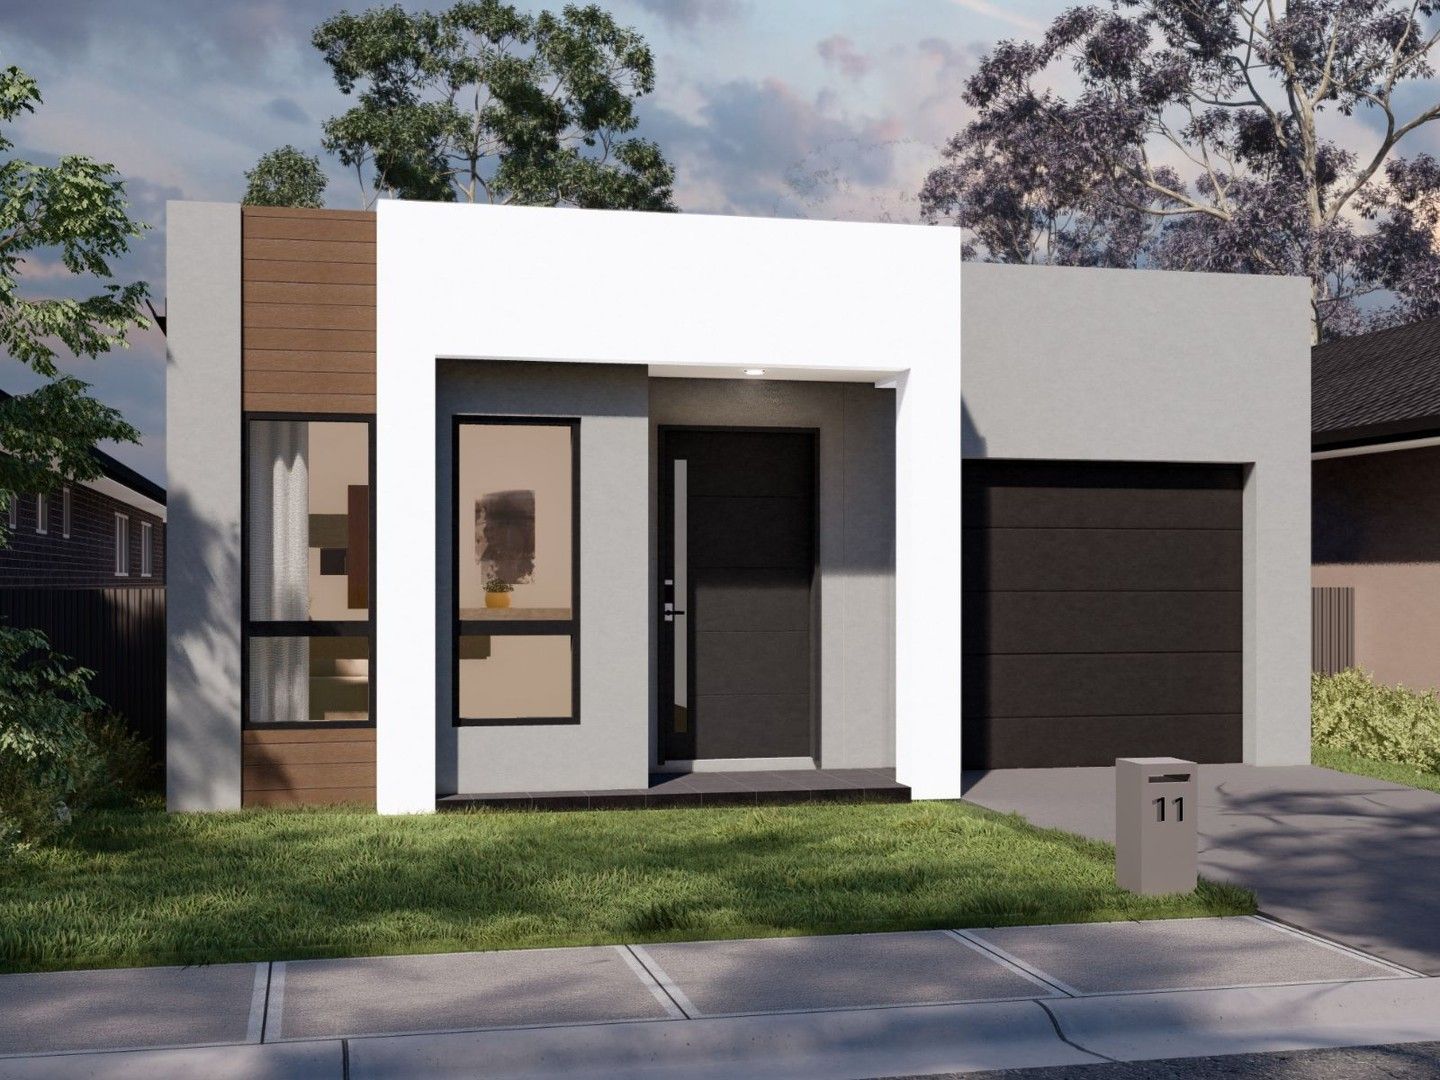 4 bedrooms New House & Land in And No Progress Payment NIRIMBA FIELDS NSW, 2763